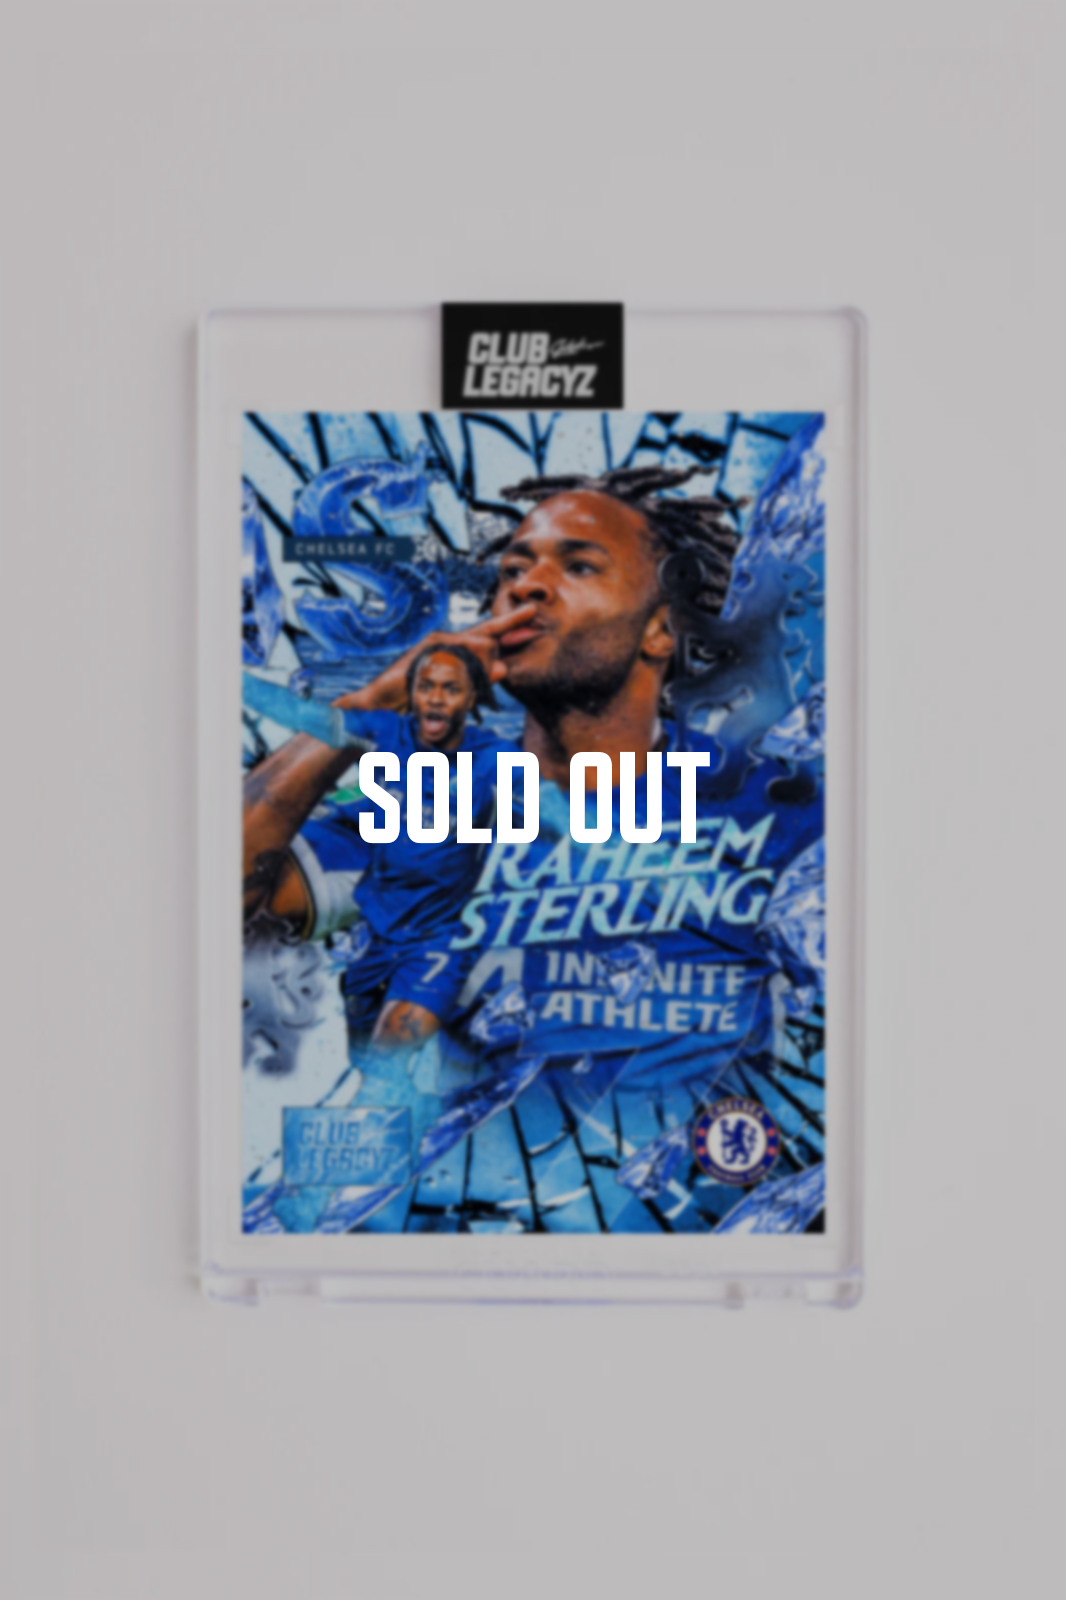 Chelsea FC - Raheem Sterling Frozen Icon limited to 100